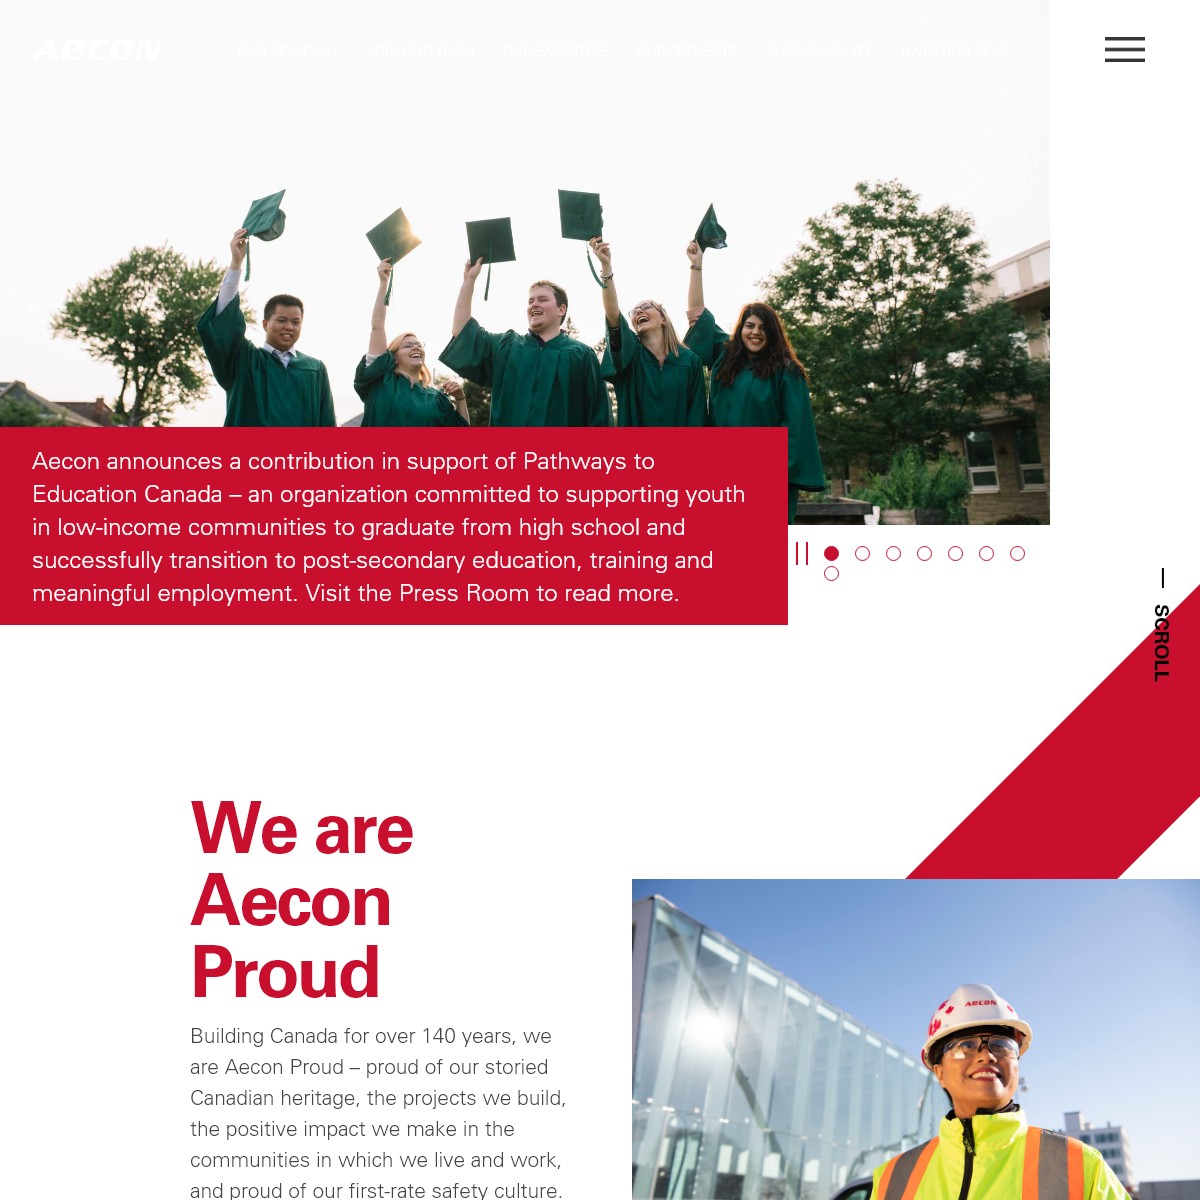 A complete backup of aecon.com